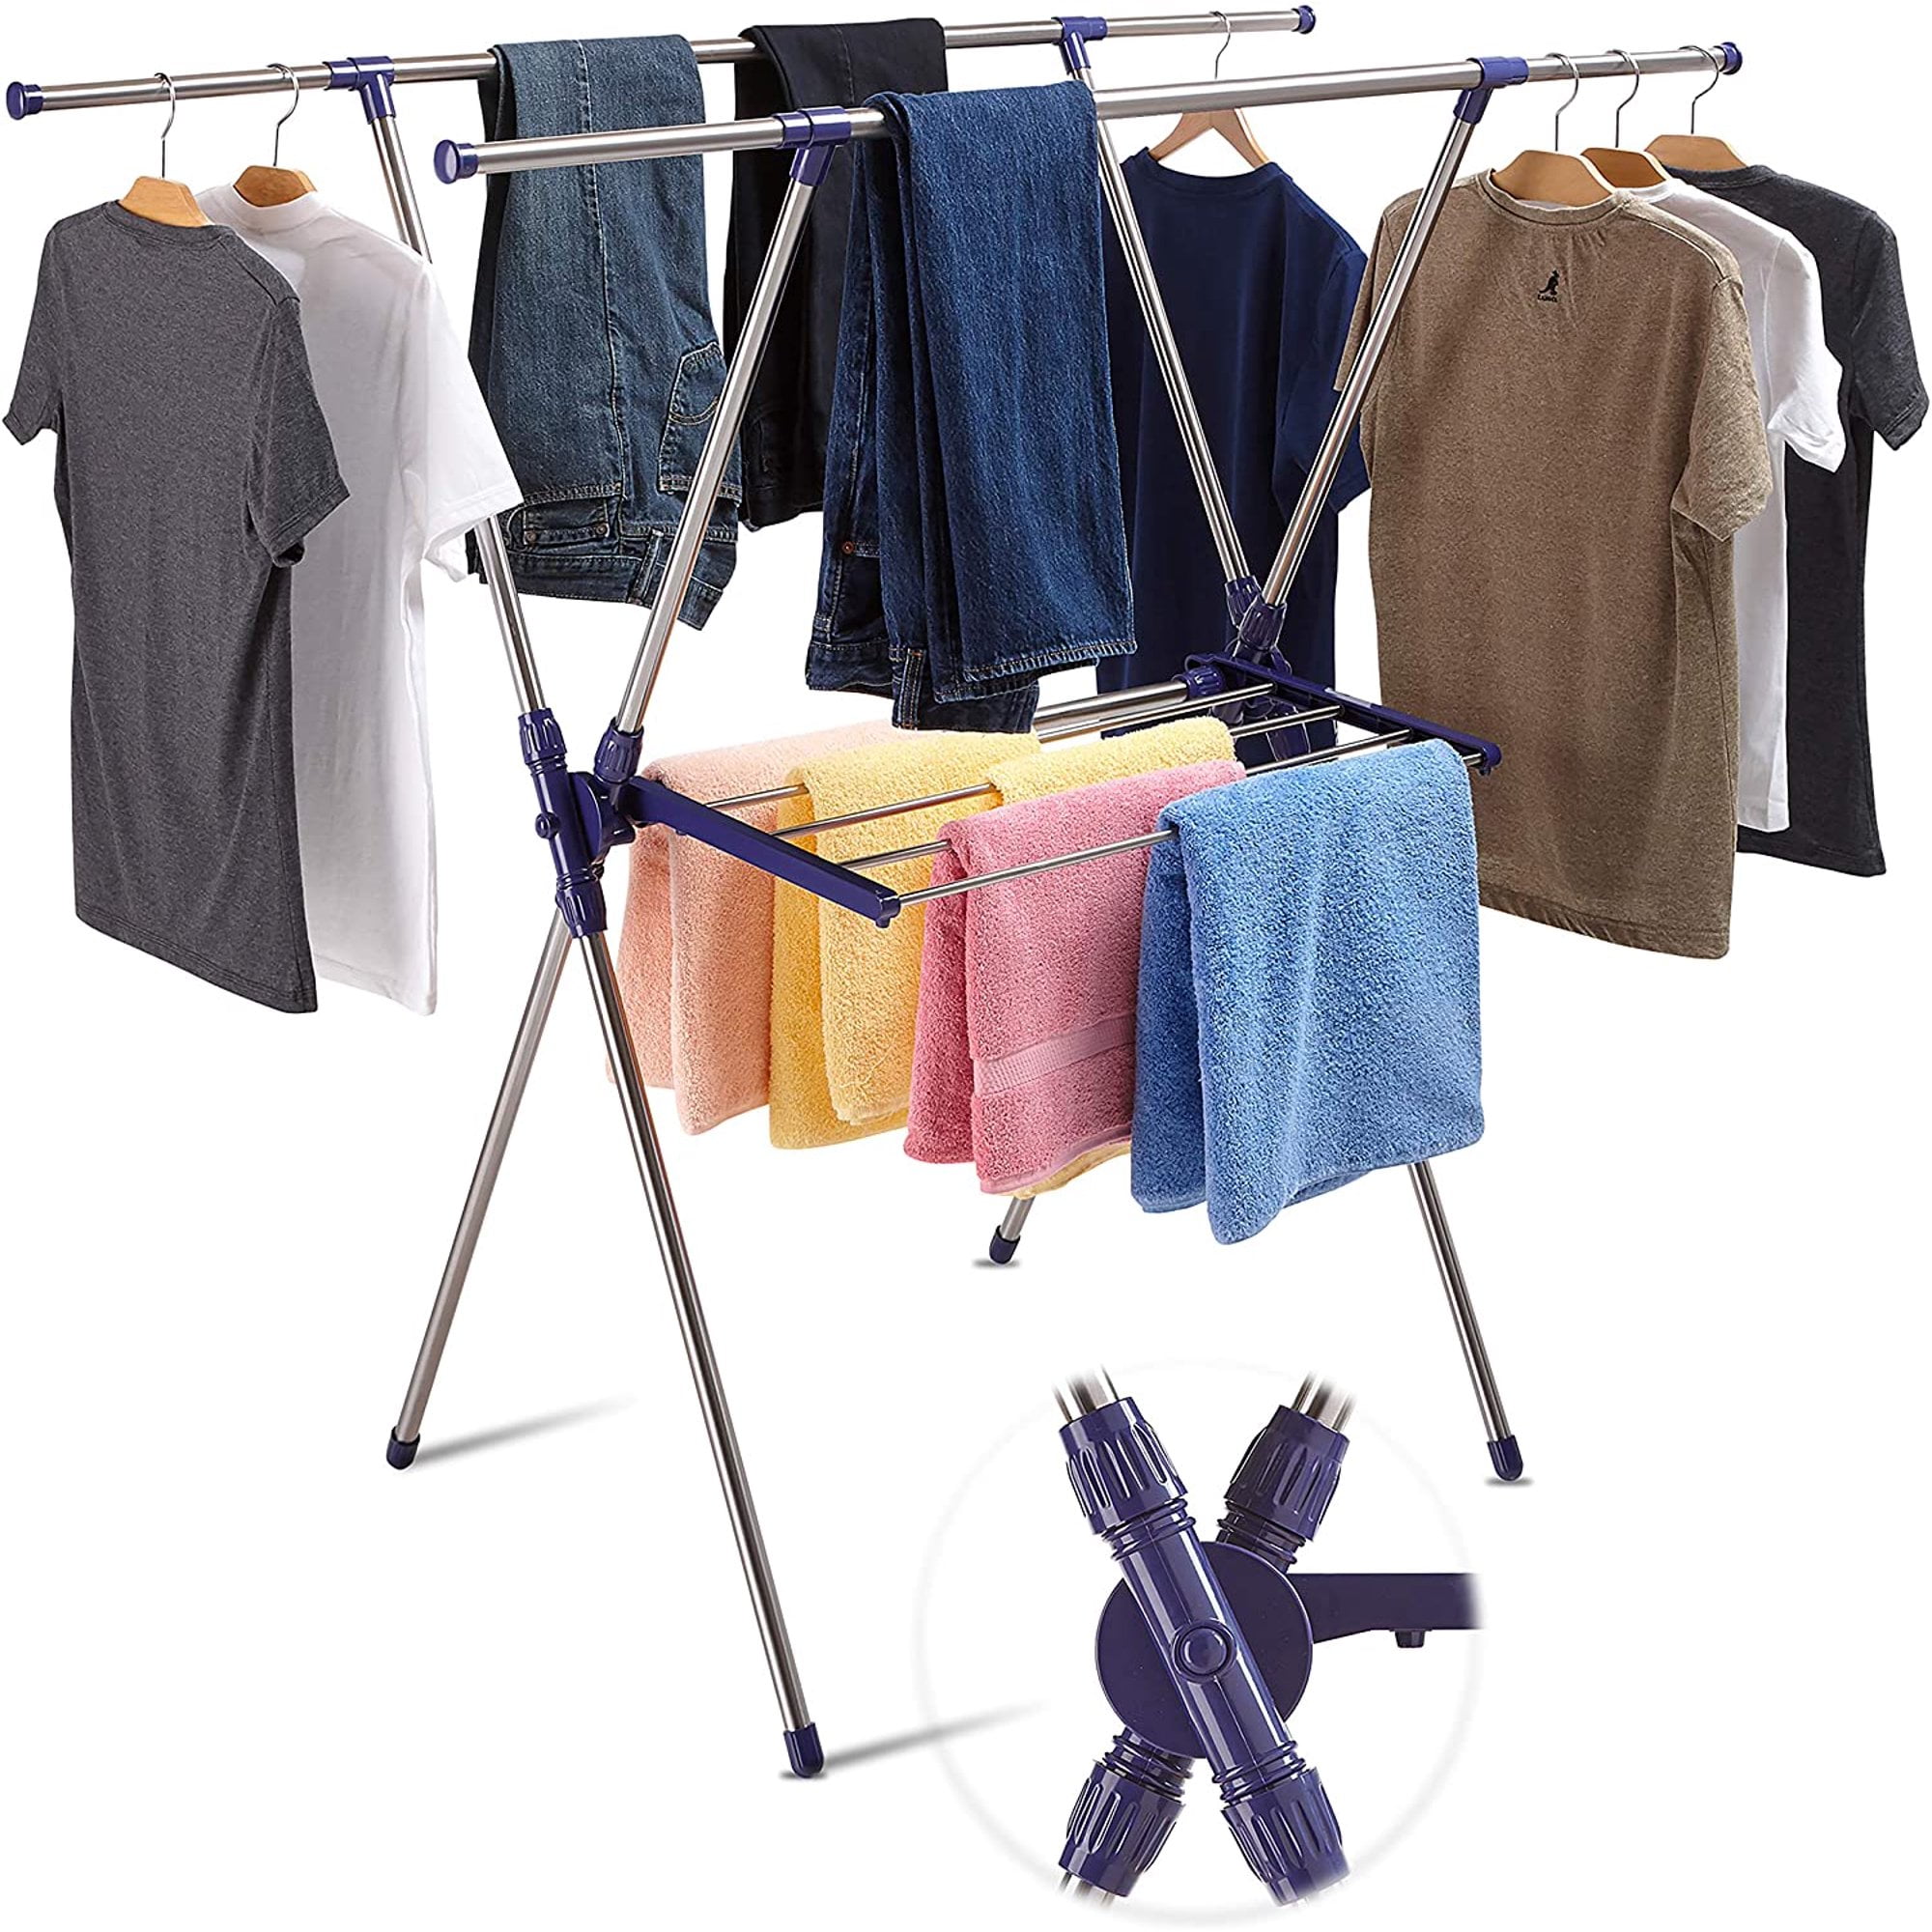 16 Peg Indoor Folding Clothes Dryer Airer Hanging Small Laundry Items Clothing 